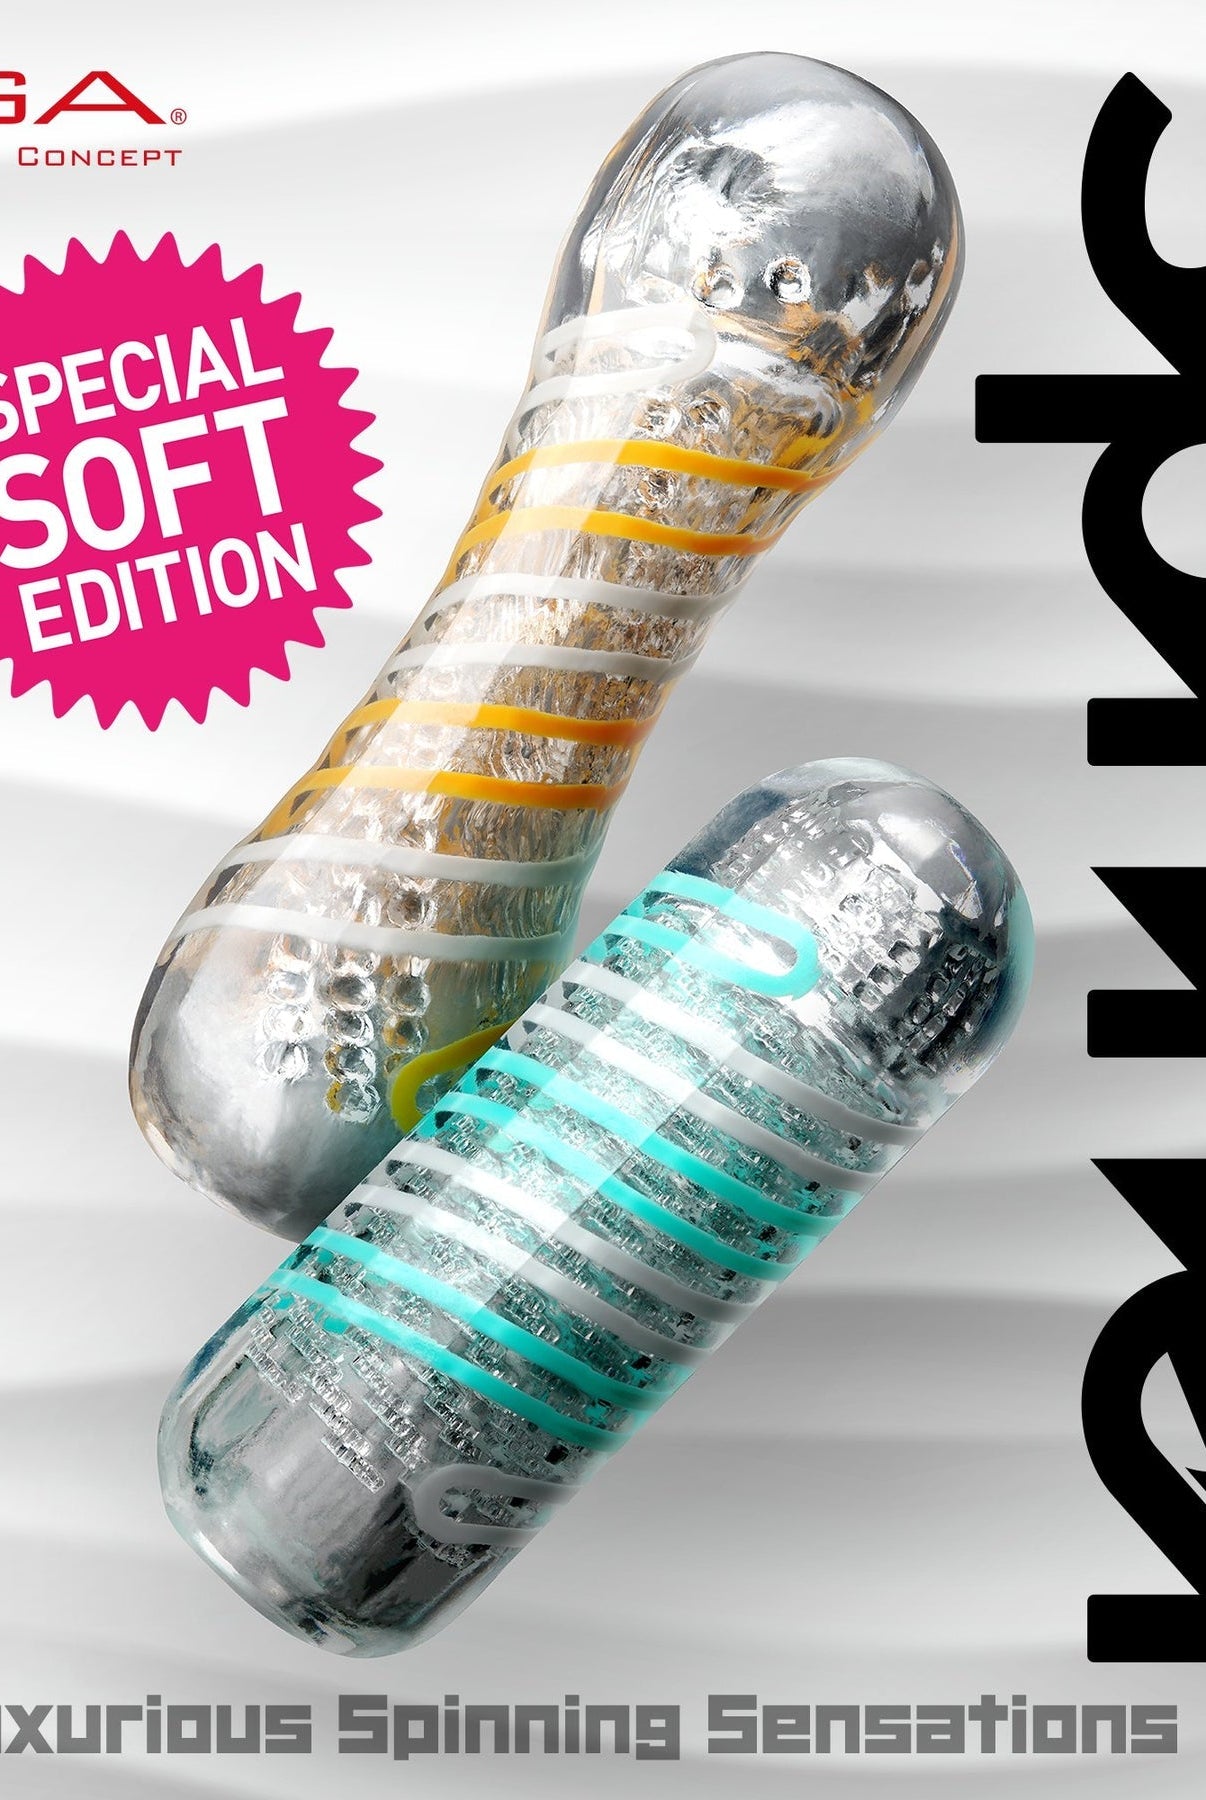 Spinner 04 Pixel Special Soft Edition - ACME Pleasure